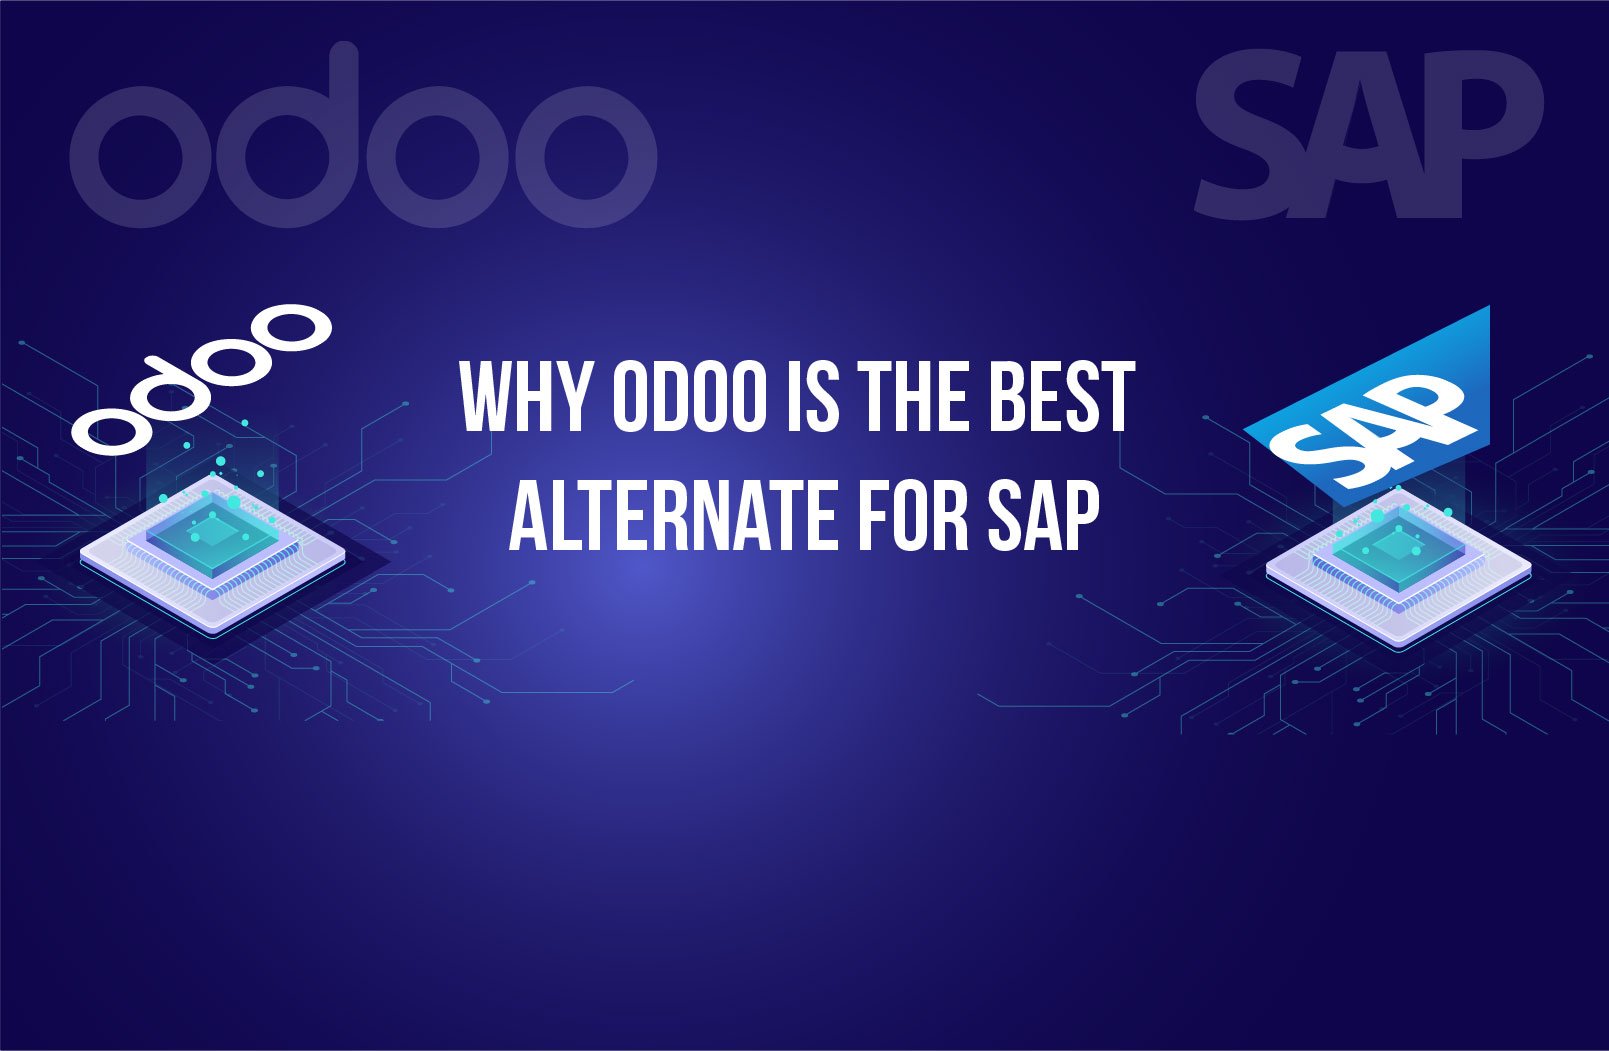 Why Odoo is the Best Alternate for SAP